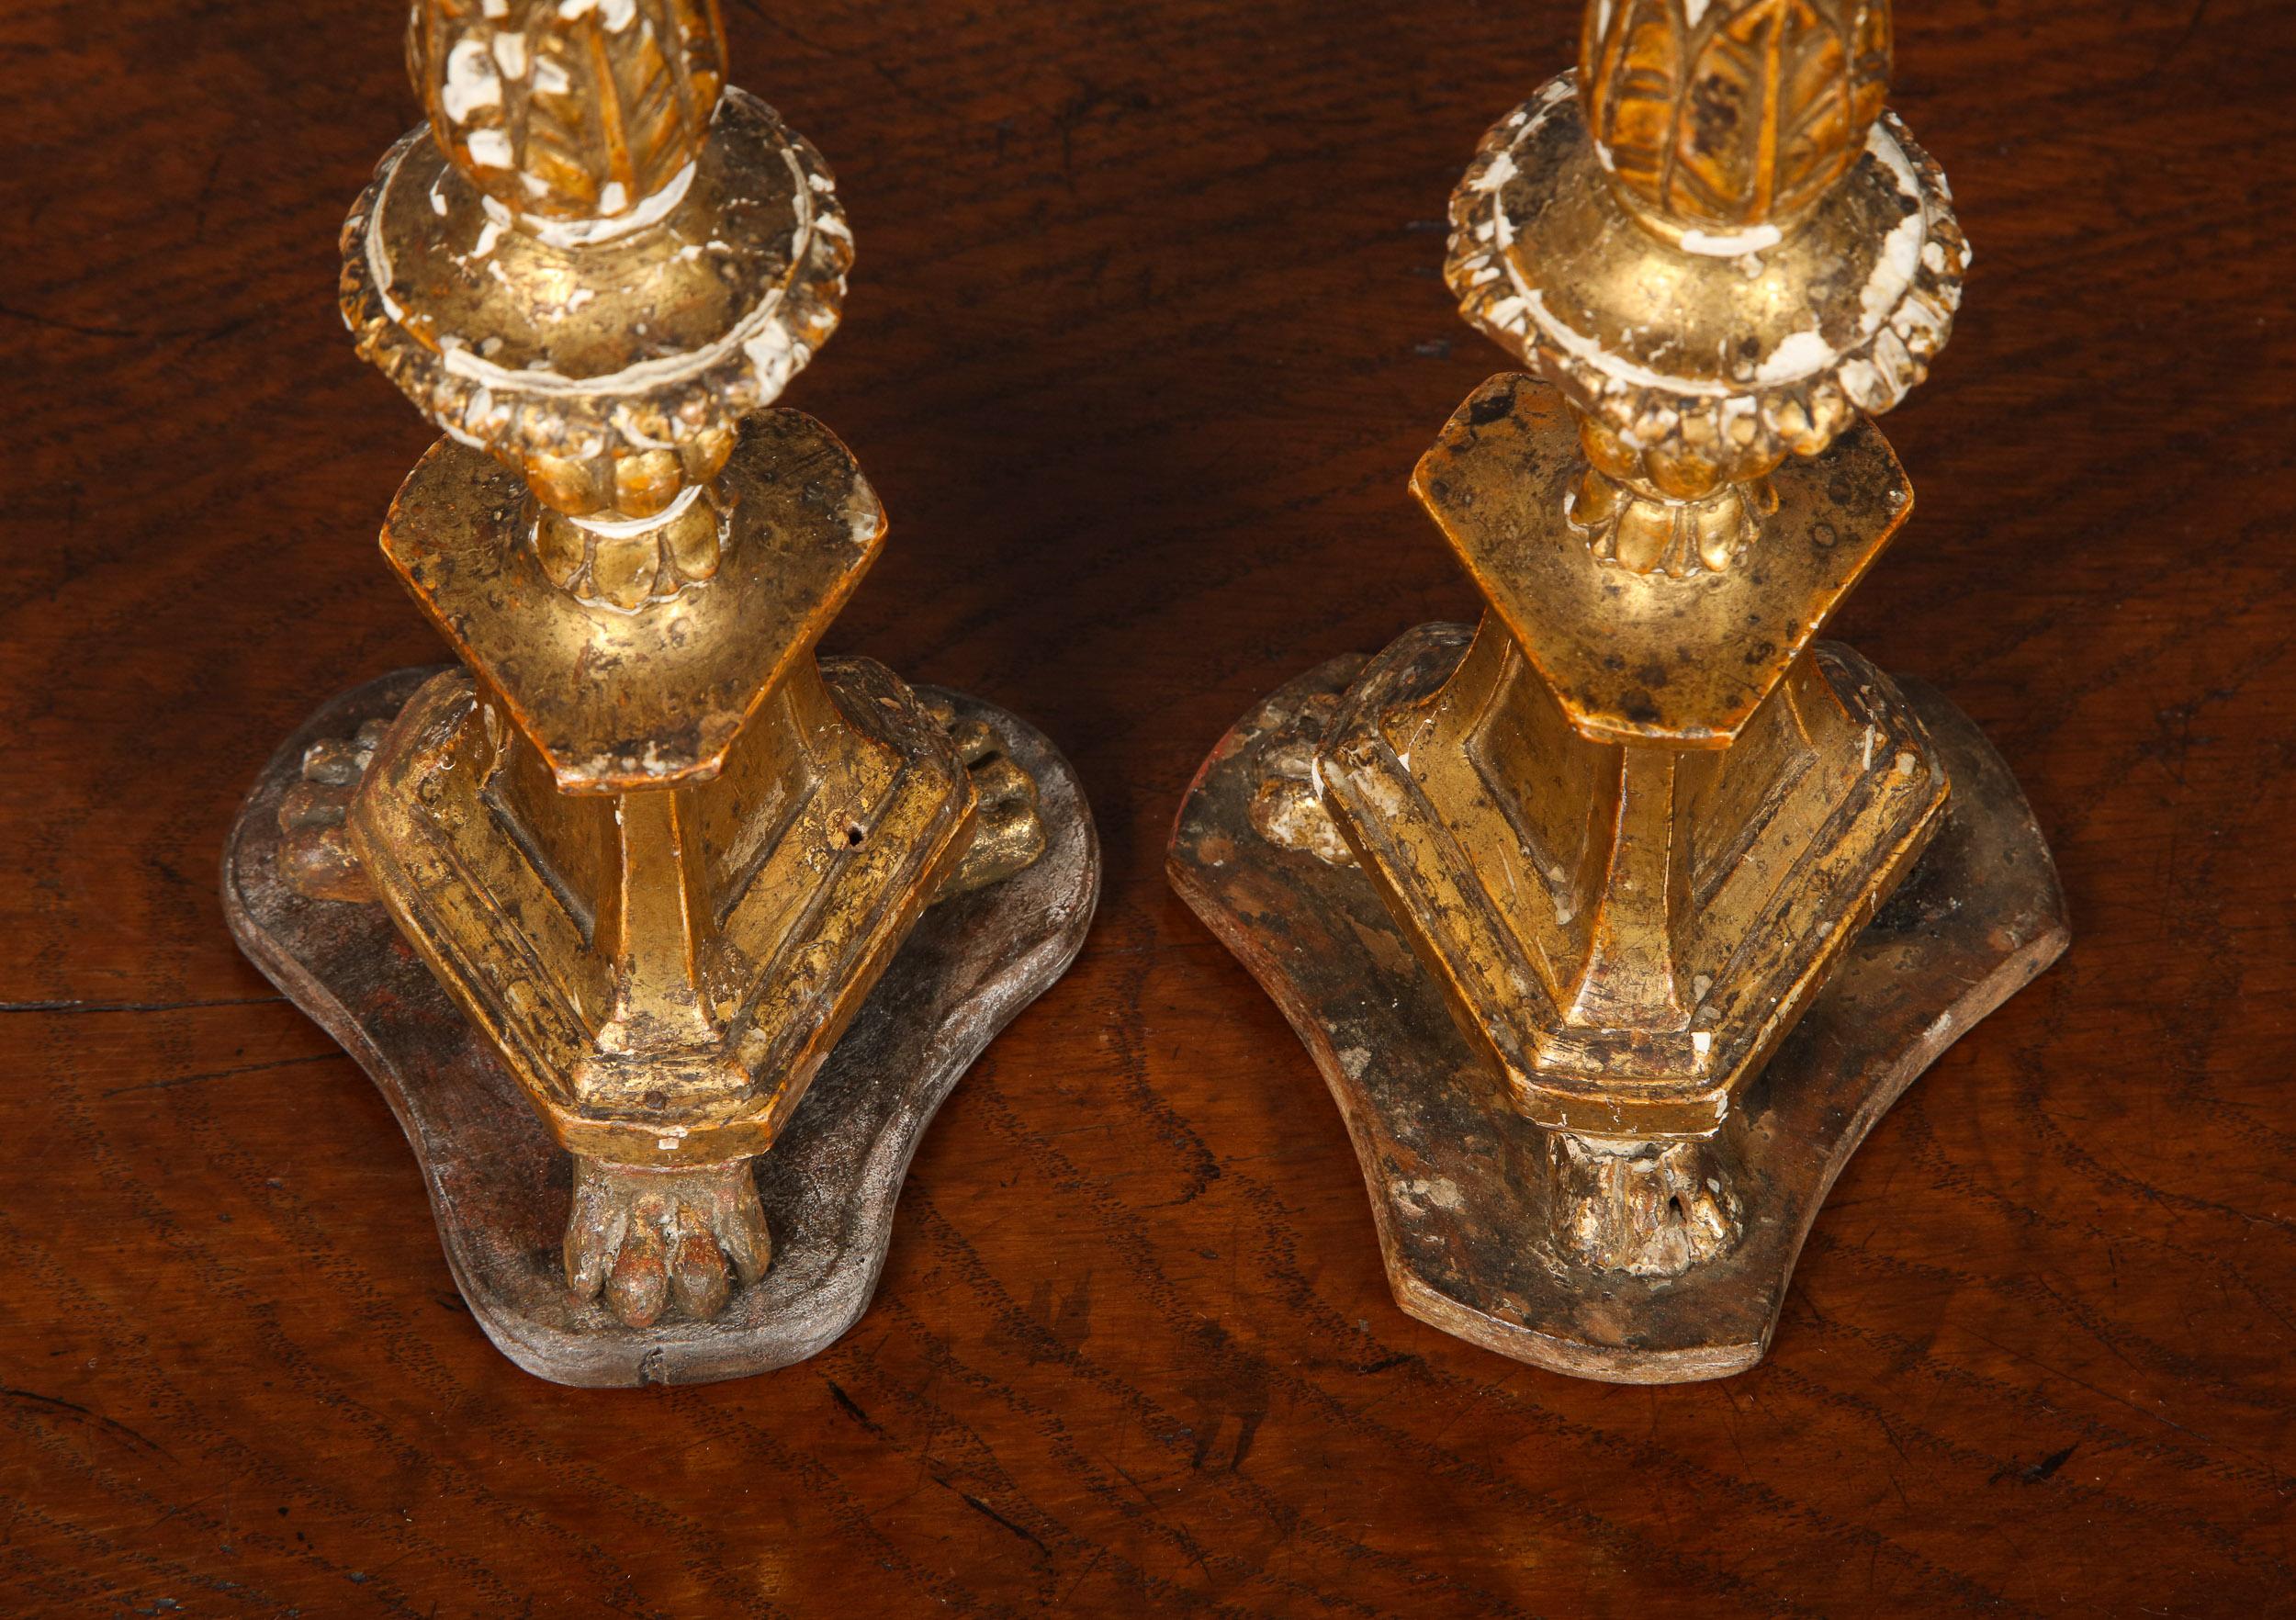 Pair of Diminutive Giltwood Pricket Candlesticks For Sale 7